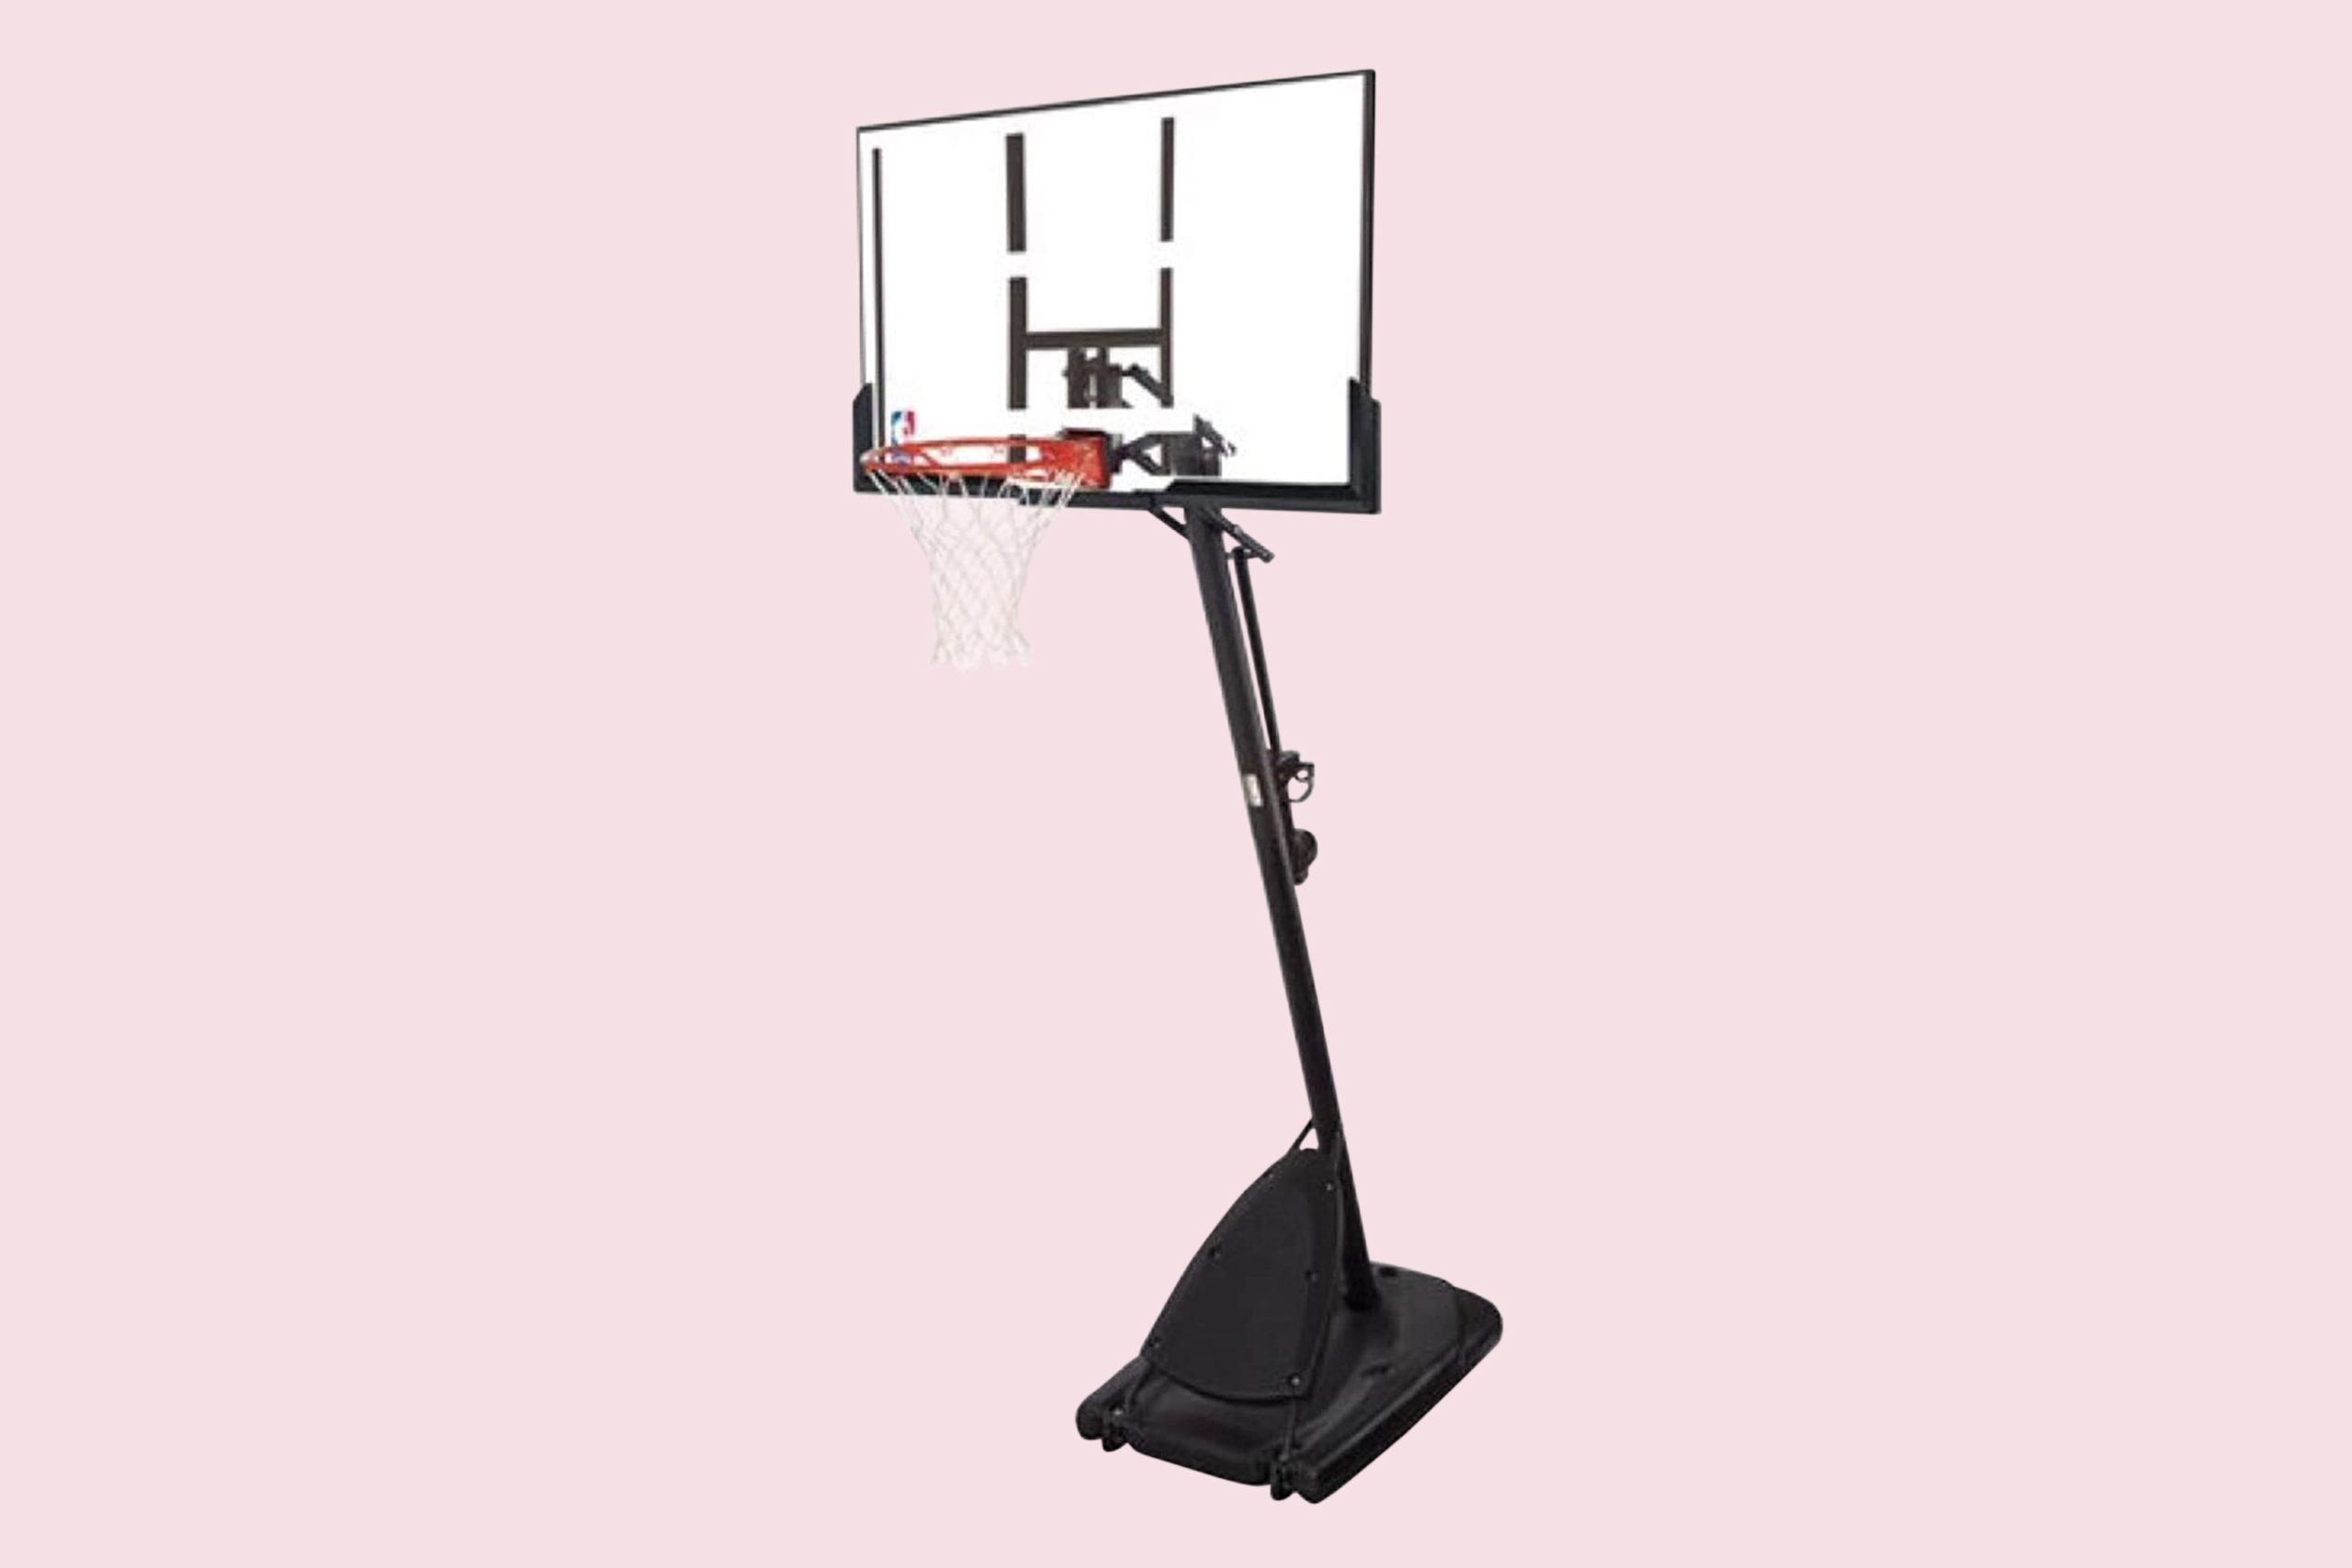 The Best Portable Basketball Hoop Made In The Usa